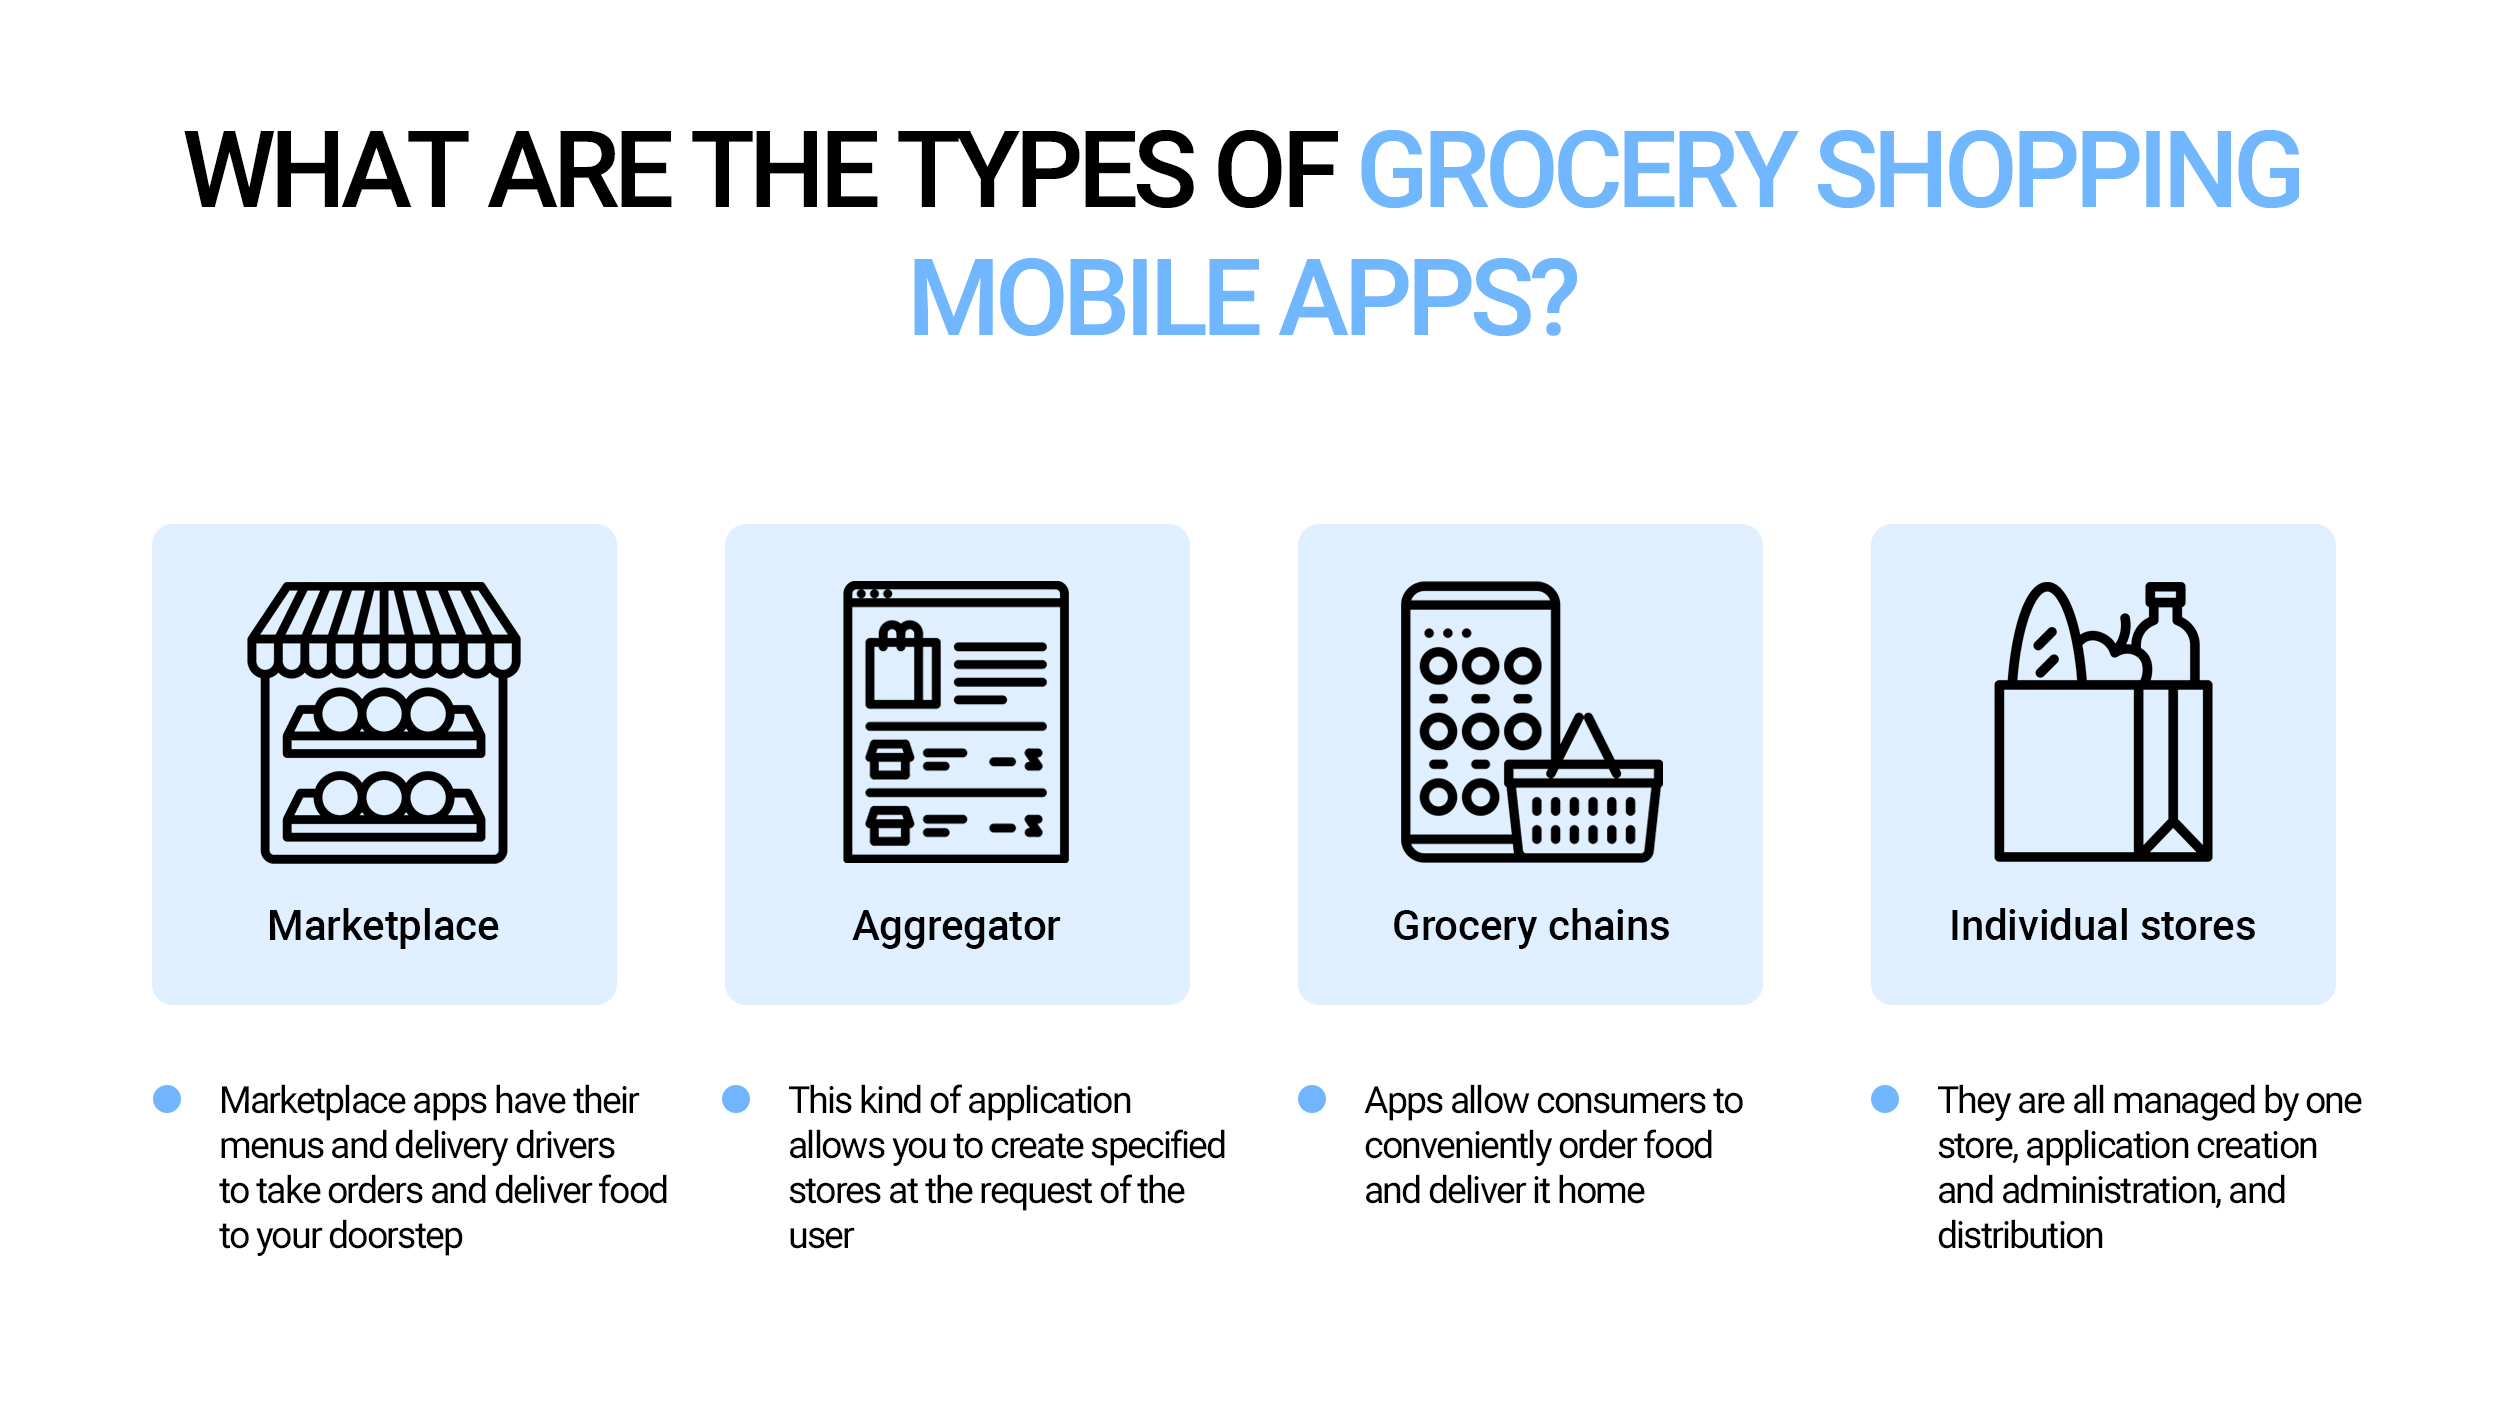 What are the types of grocery shopping mobile apps